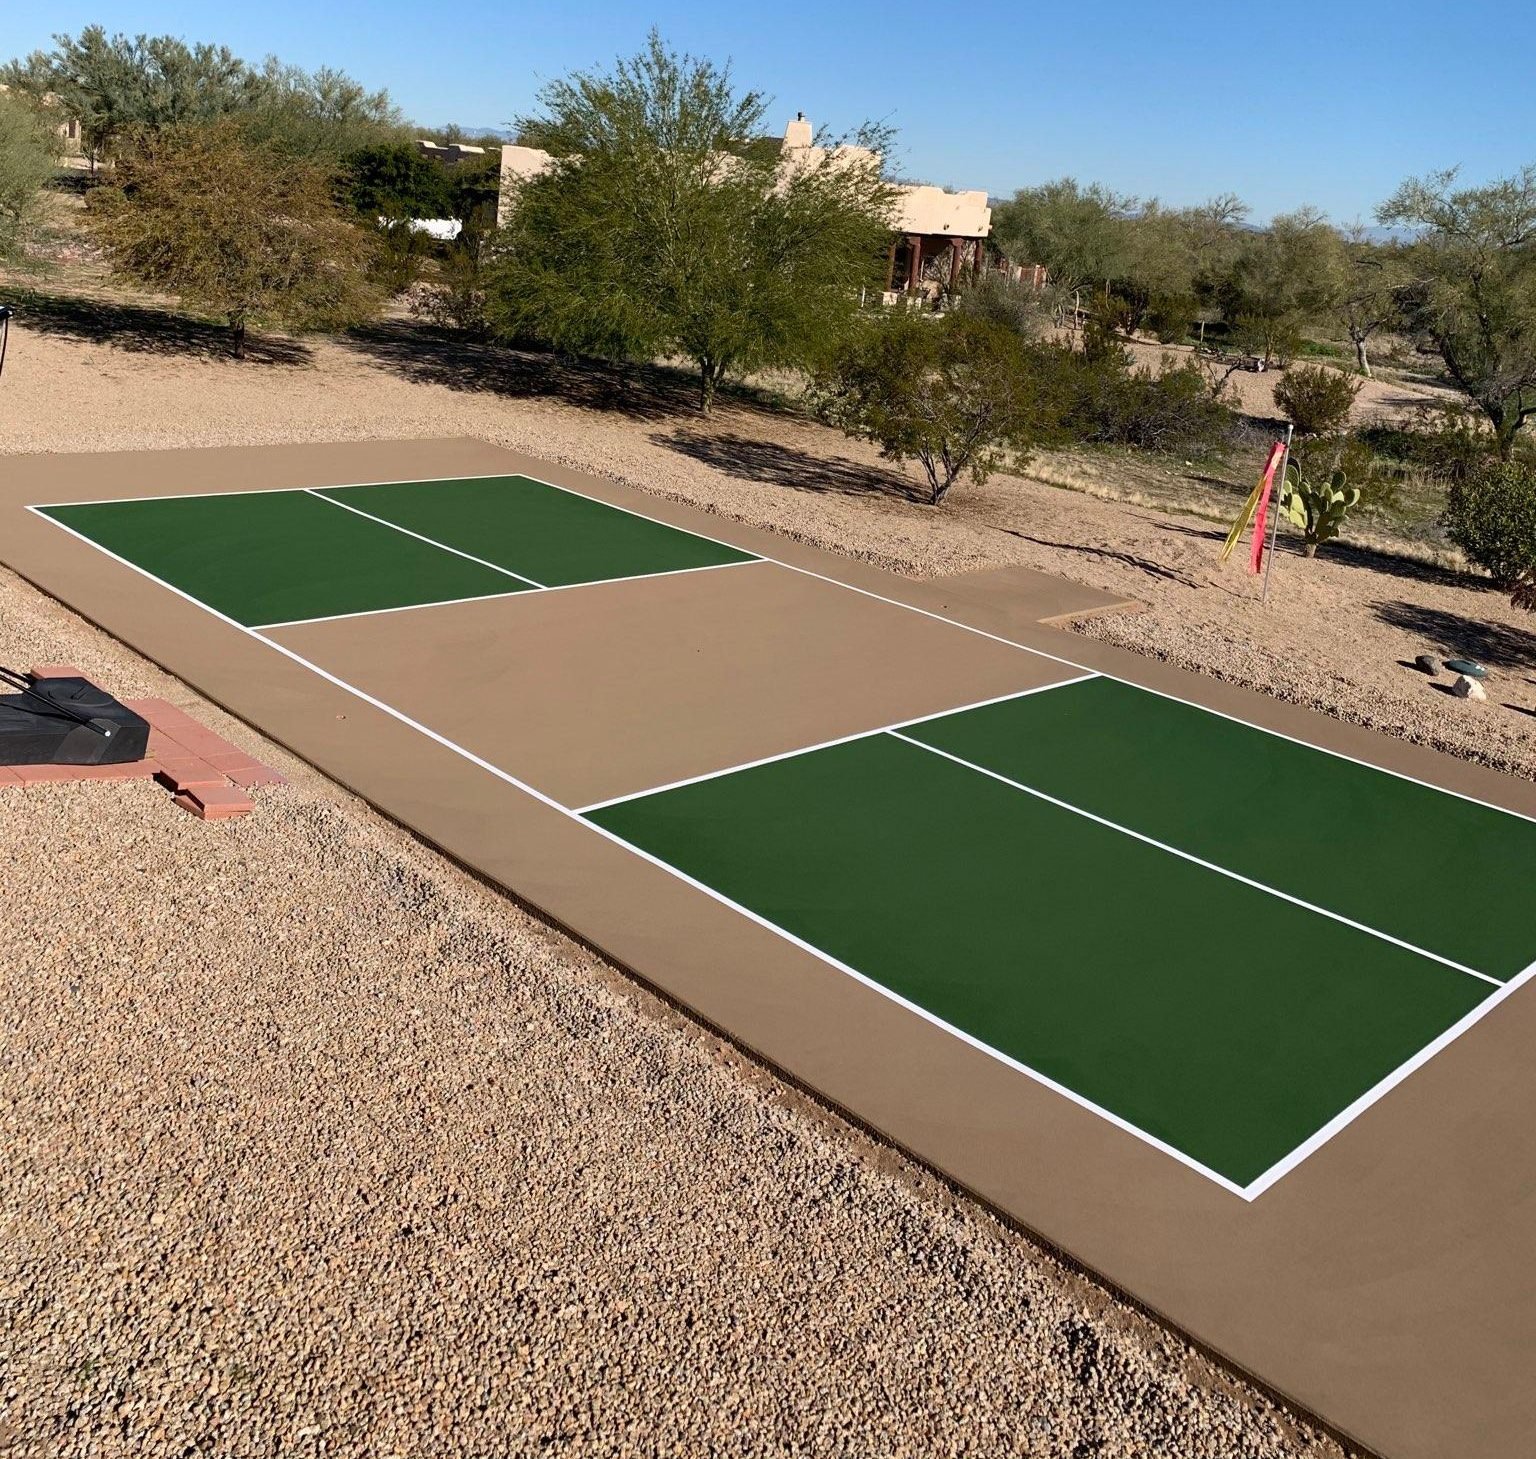 How to Build an Outdoor Pickleball Court